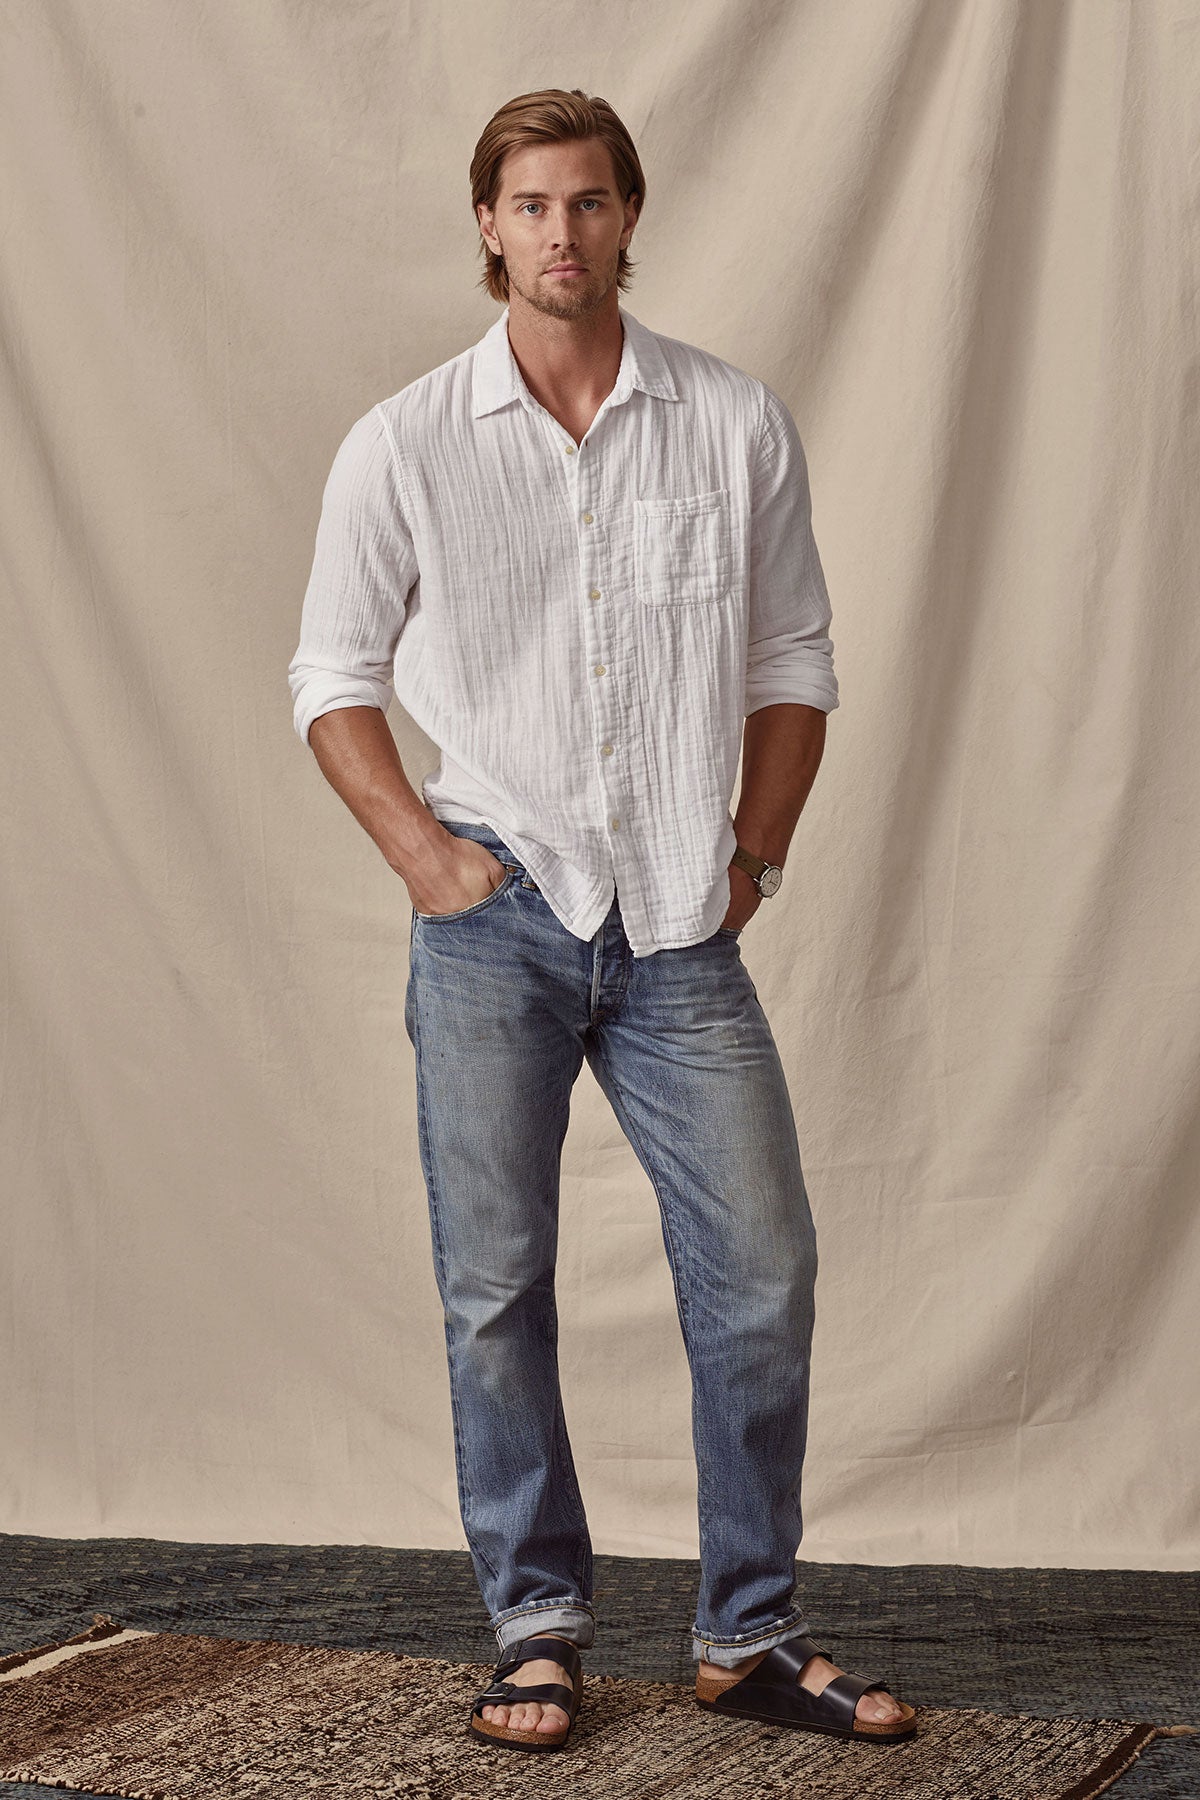 Man standing against a cream backdrop, wearing a Velvet by Graham & Spencer Elton Cotton Gauze Button-Up Shirt, blue jeans, and black sandals, with his left hand in his pocket.-36288975601857